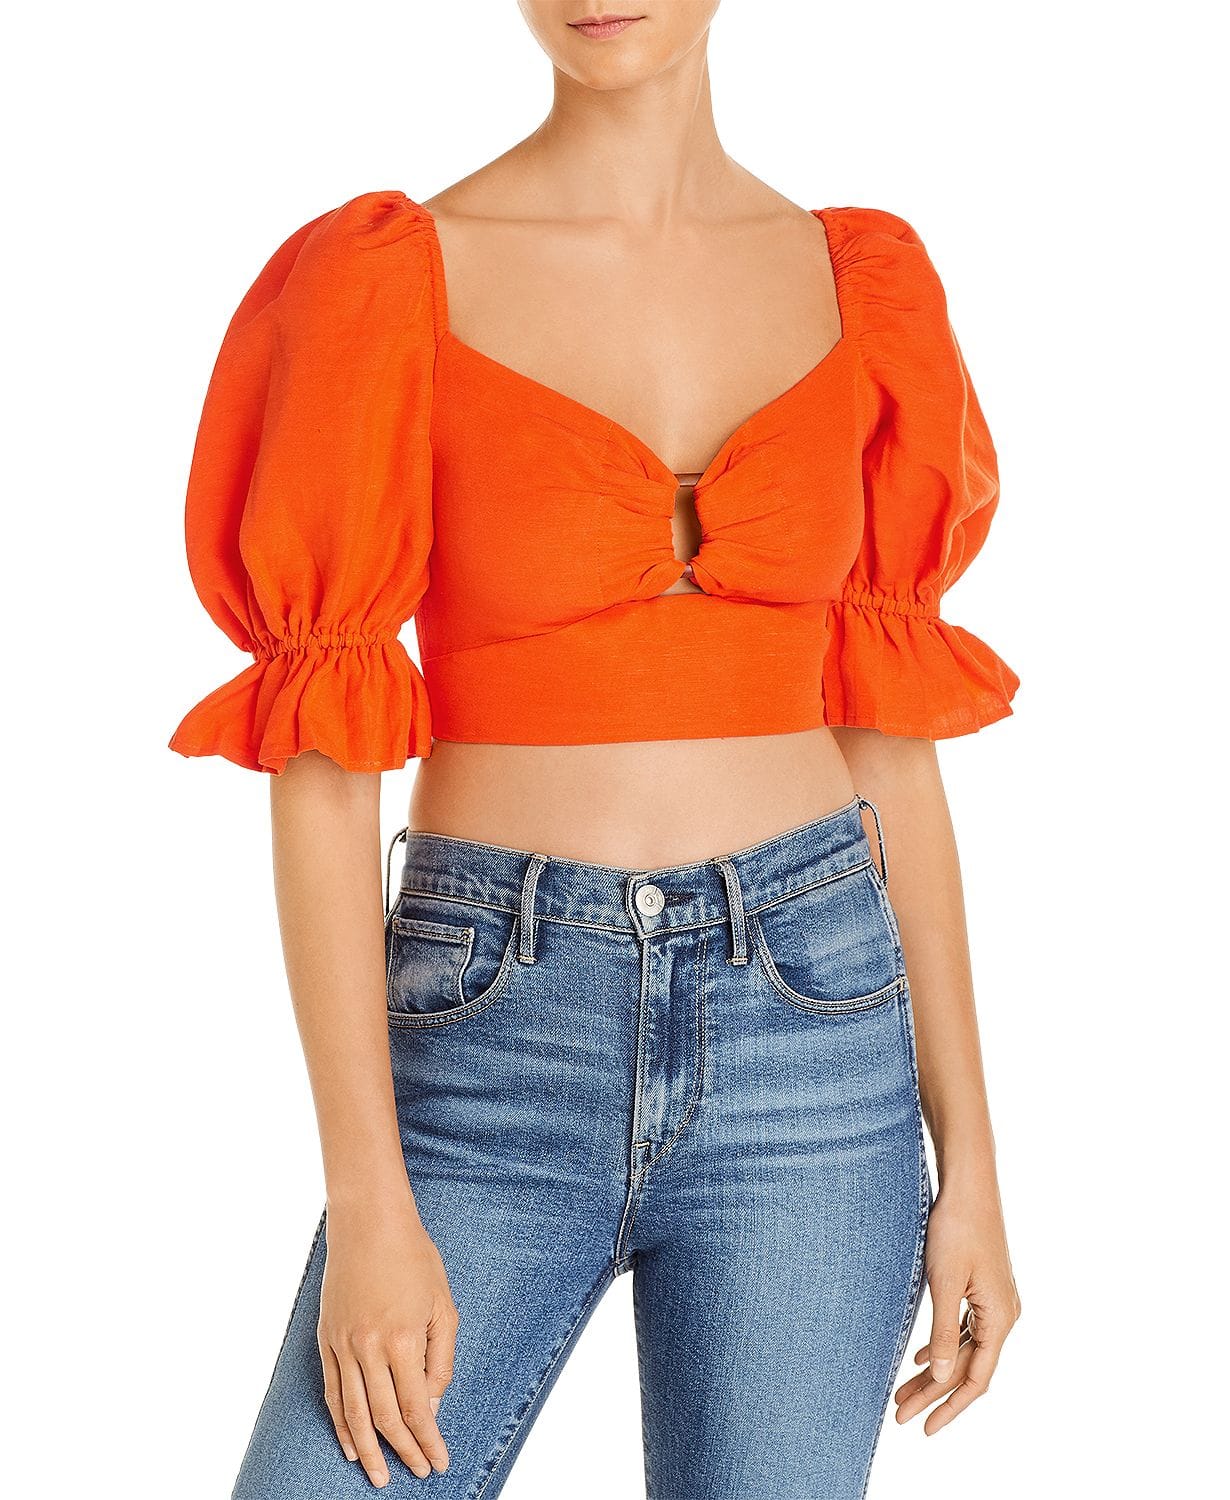 woocommerce-673321-2209615.cloudwaysapps.com-cmeo-collective-womens-orange-puffed-sleeve-cropped-top